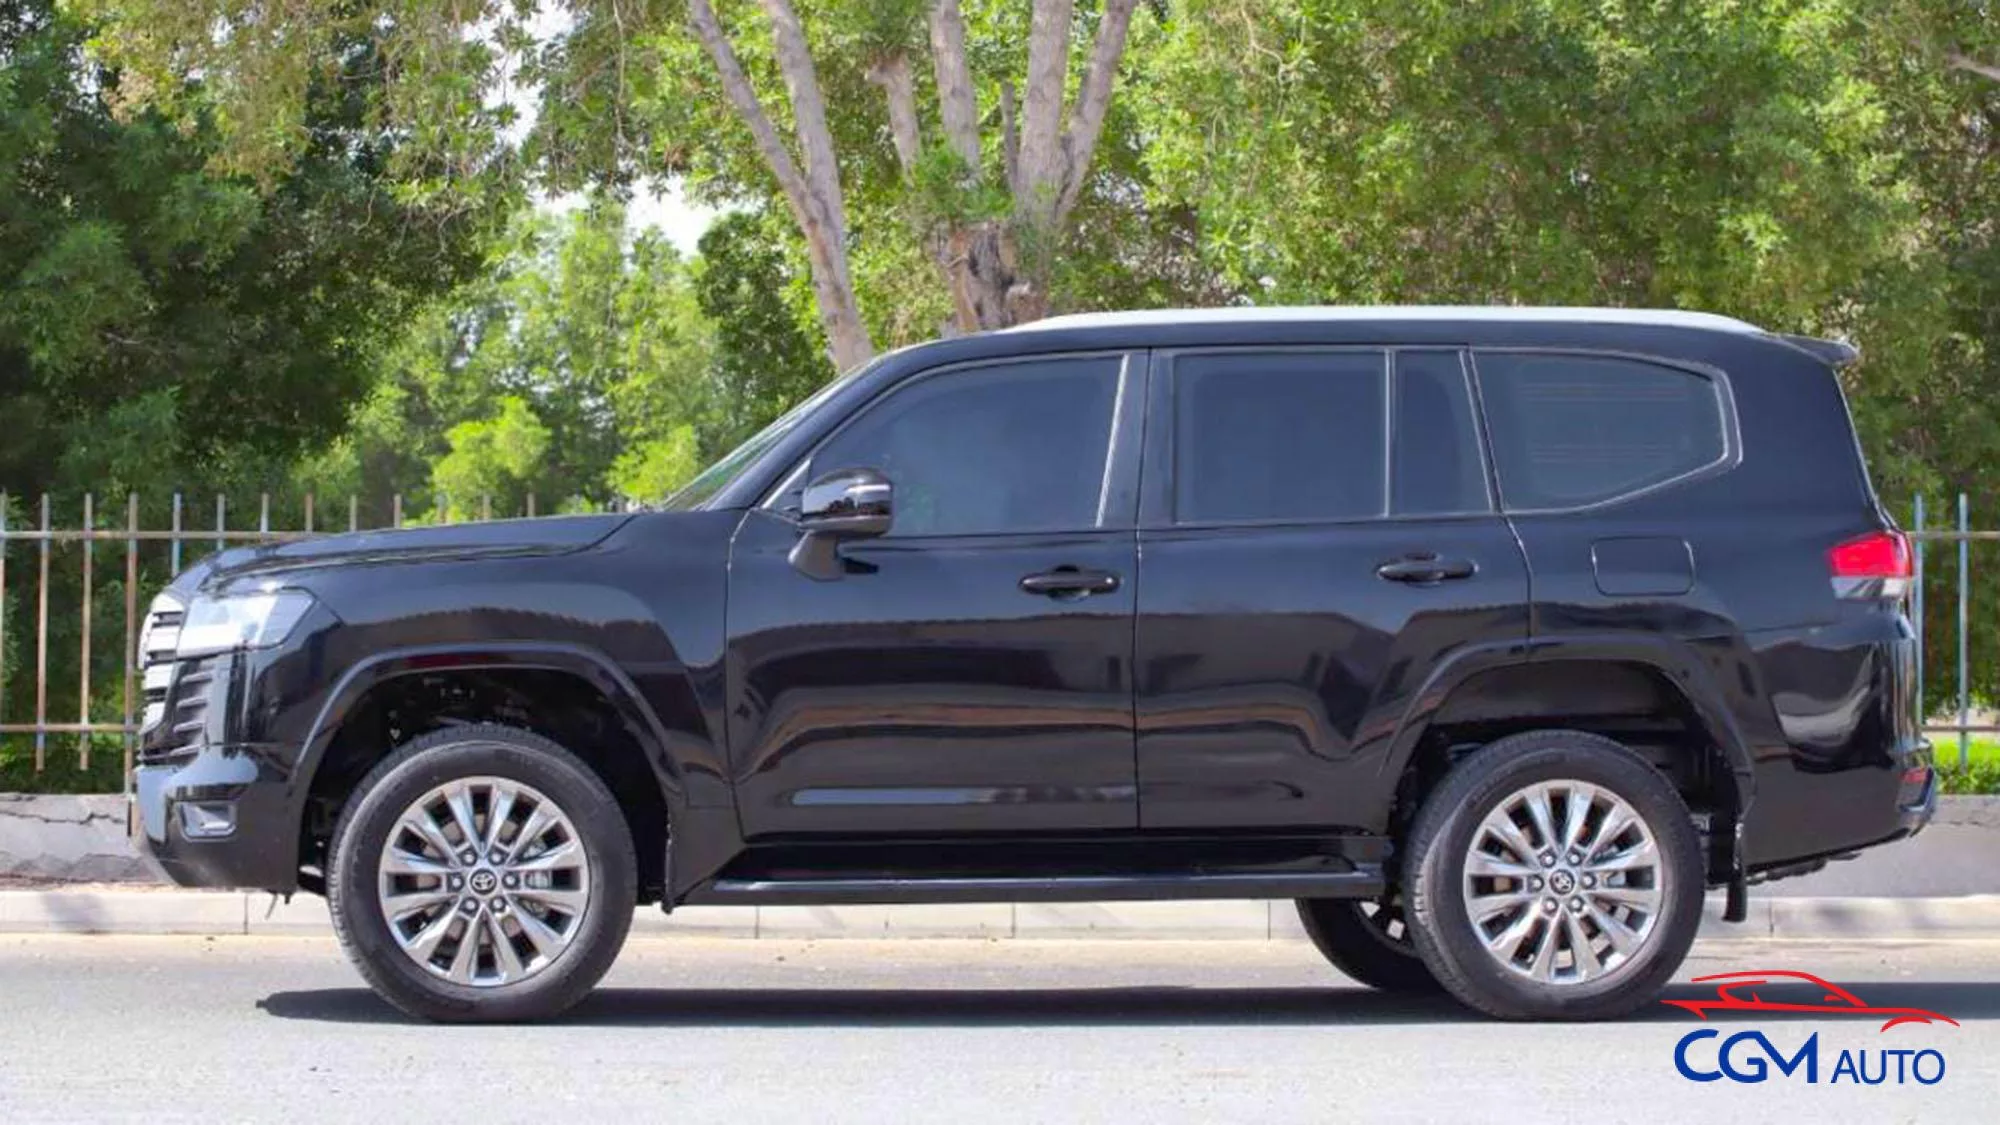 New Toyota Armored Land cruiser 300 Car for sale in the UAE, Dubai, Sharjah and Abu Dhabi | Special Offers